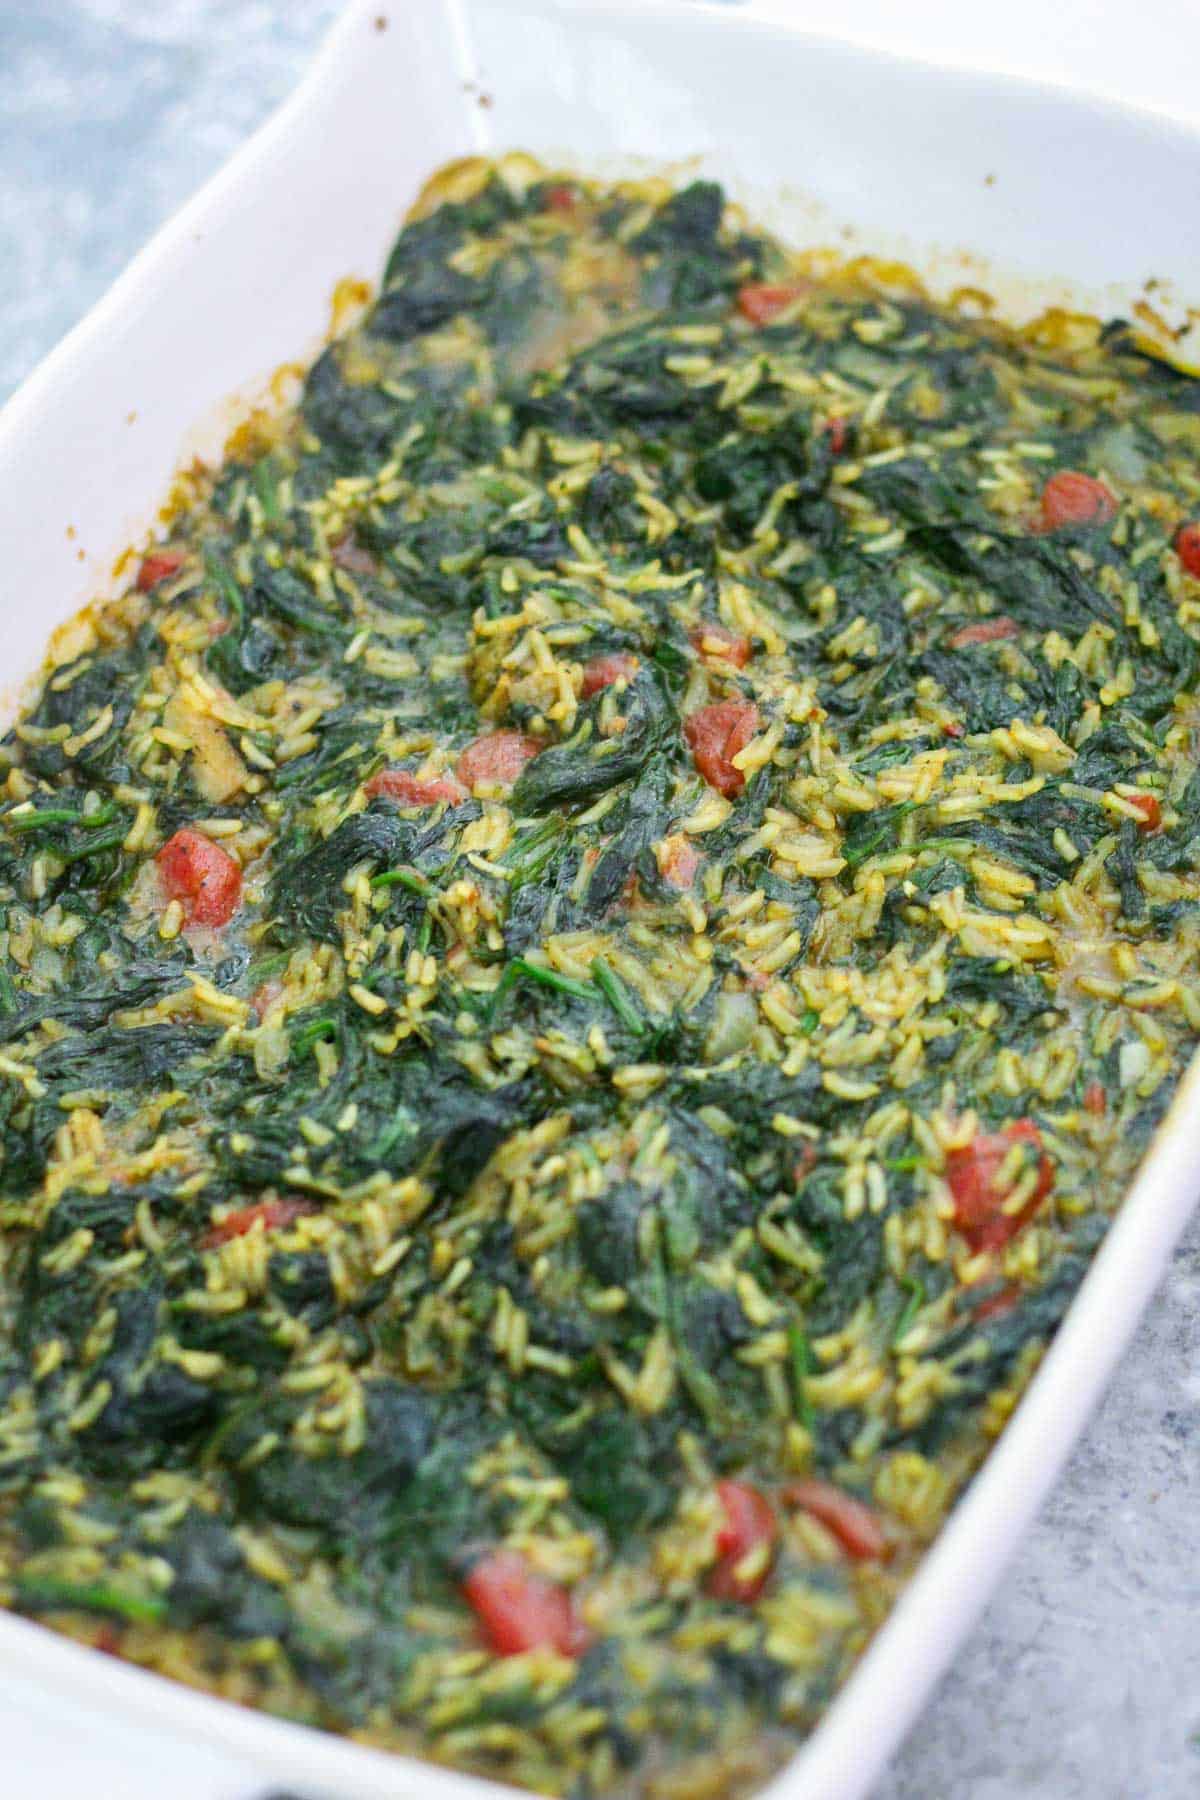 Spinach and rice after first bake.